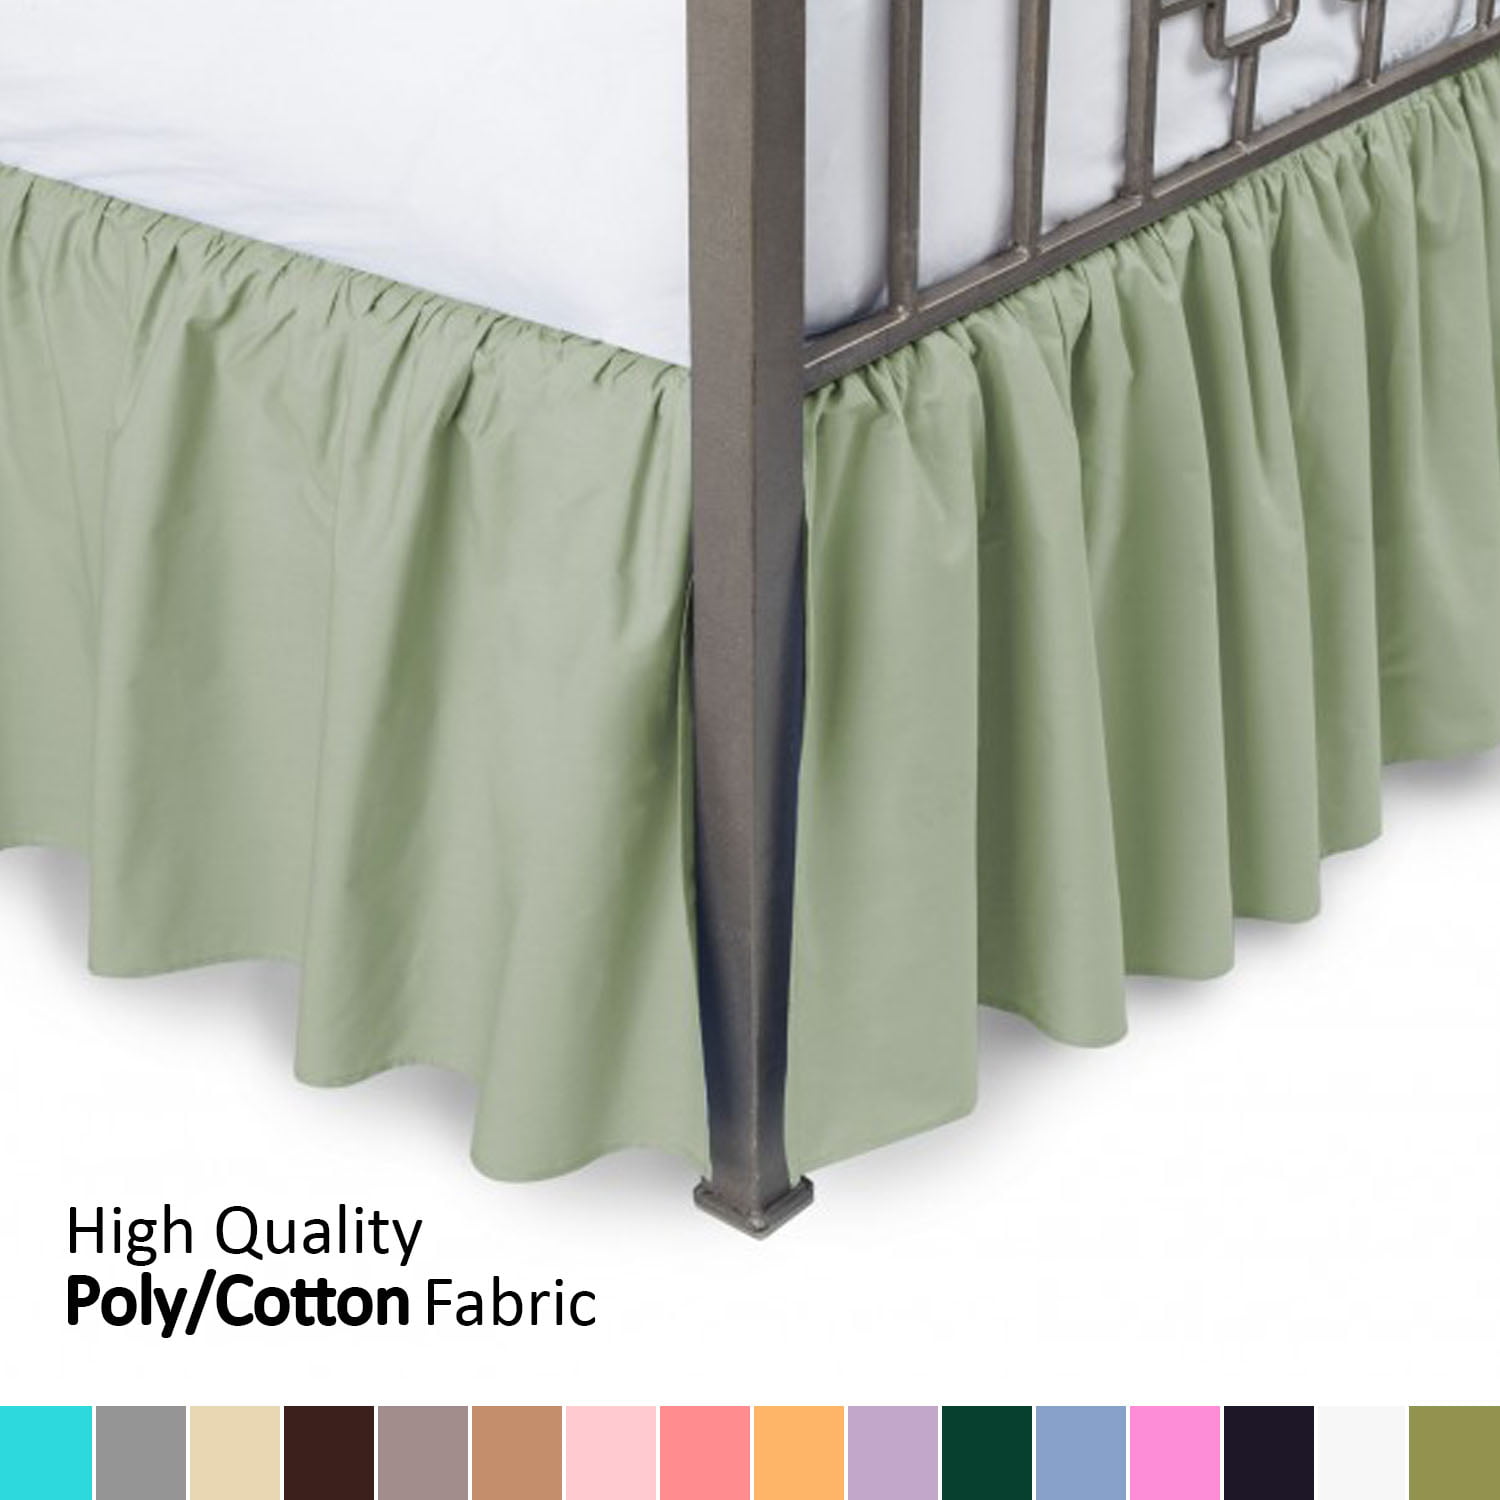 Elastic Bed Skirt 14 Drop Easy On/Easy Off Dust Ruffled Solid New Sage Green, Twin-Full 